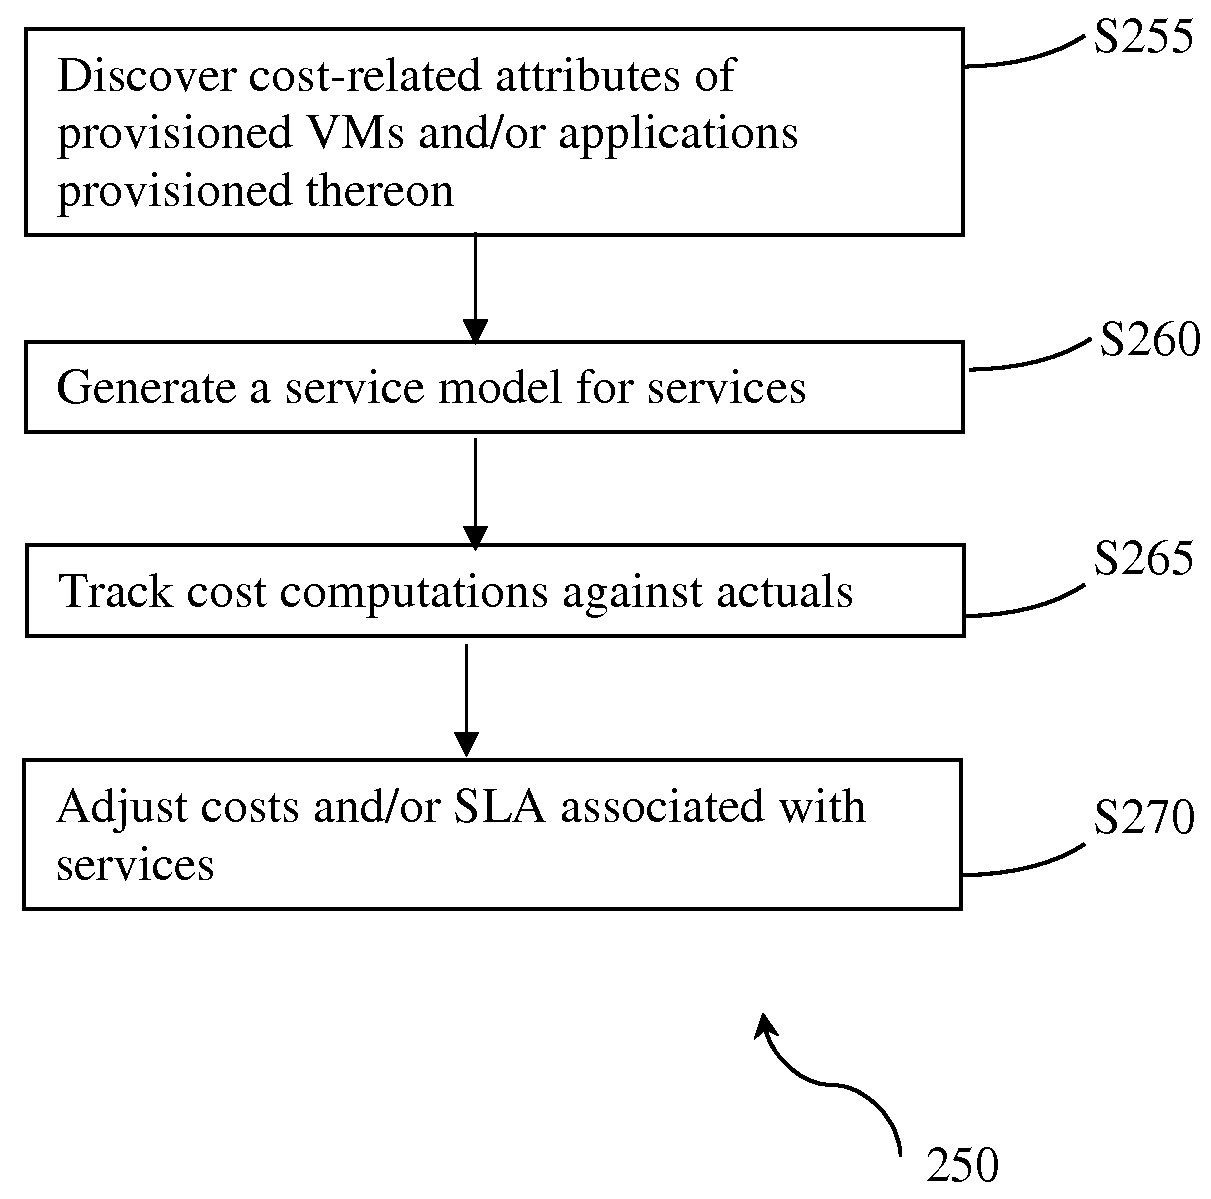 Generating a service cost model using discovered attributes of provisioned virtual machines